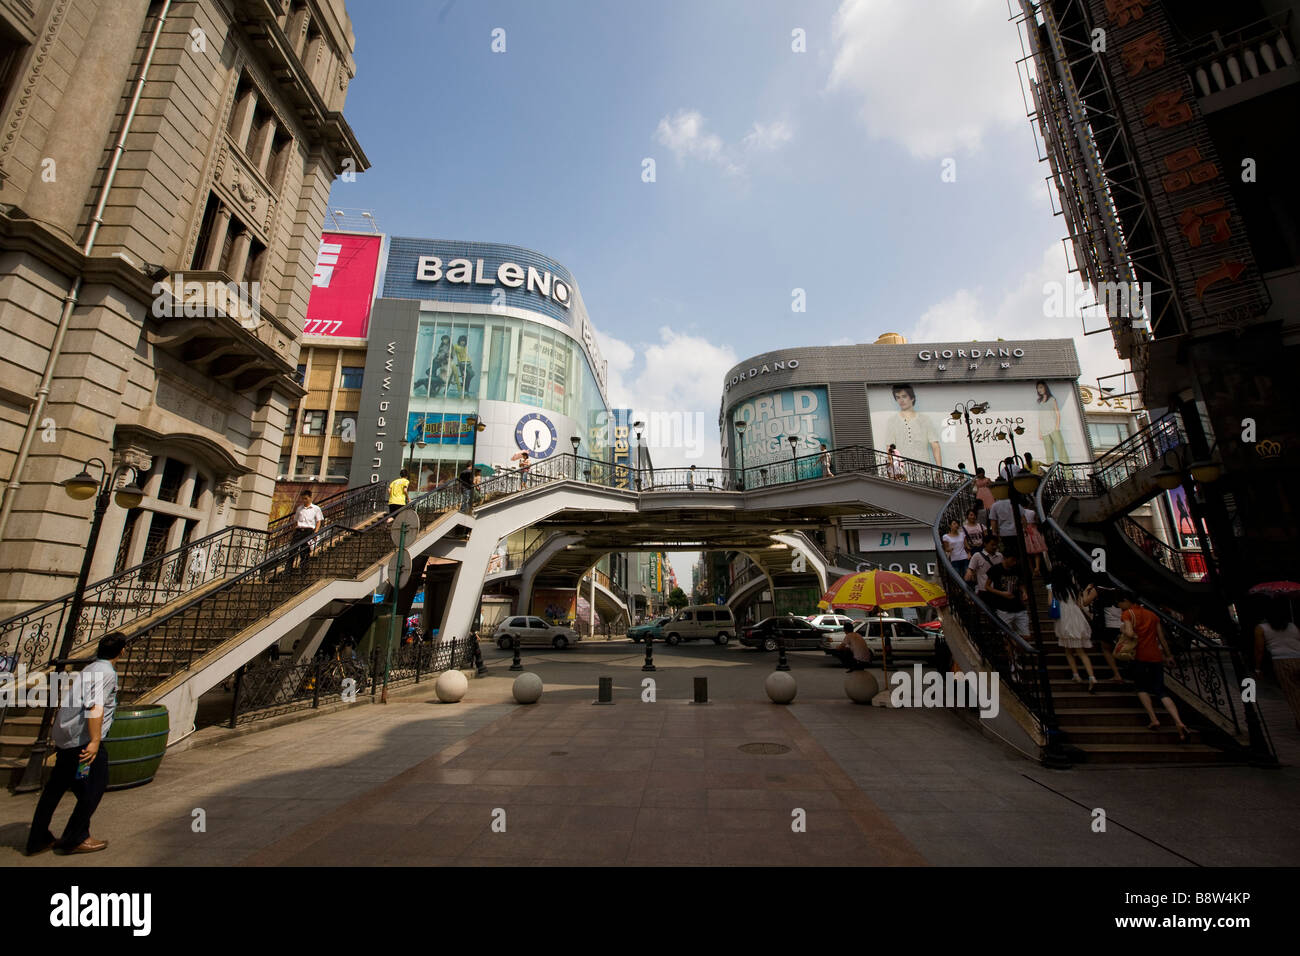 A pedestrian shopping street in downtown Hankou district, Wuhan city, China. Stock Photo